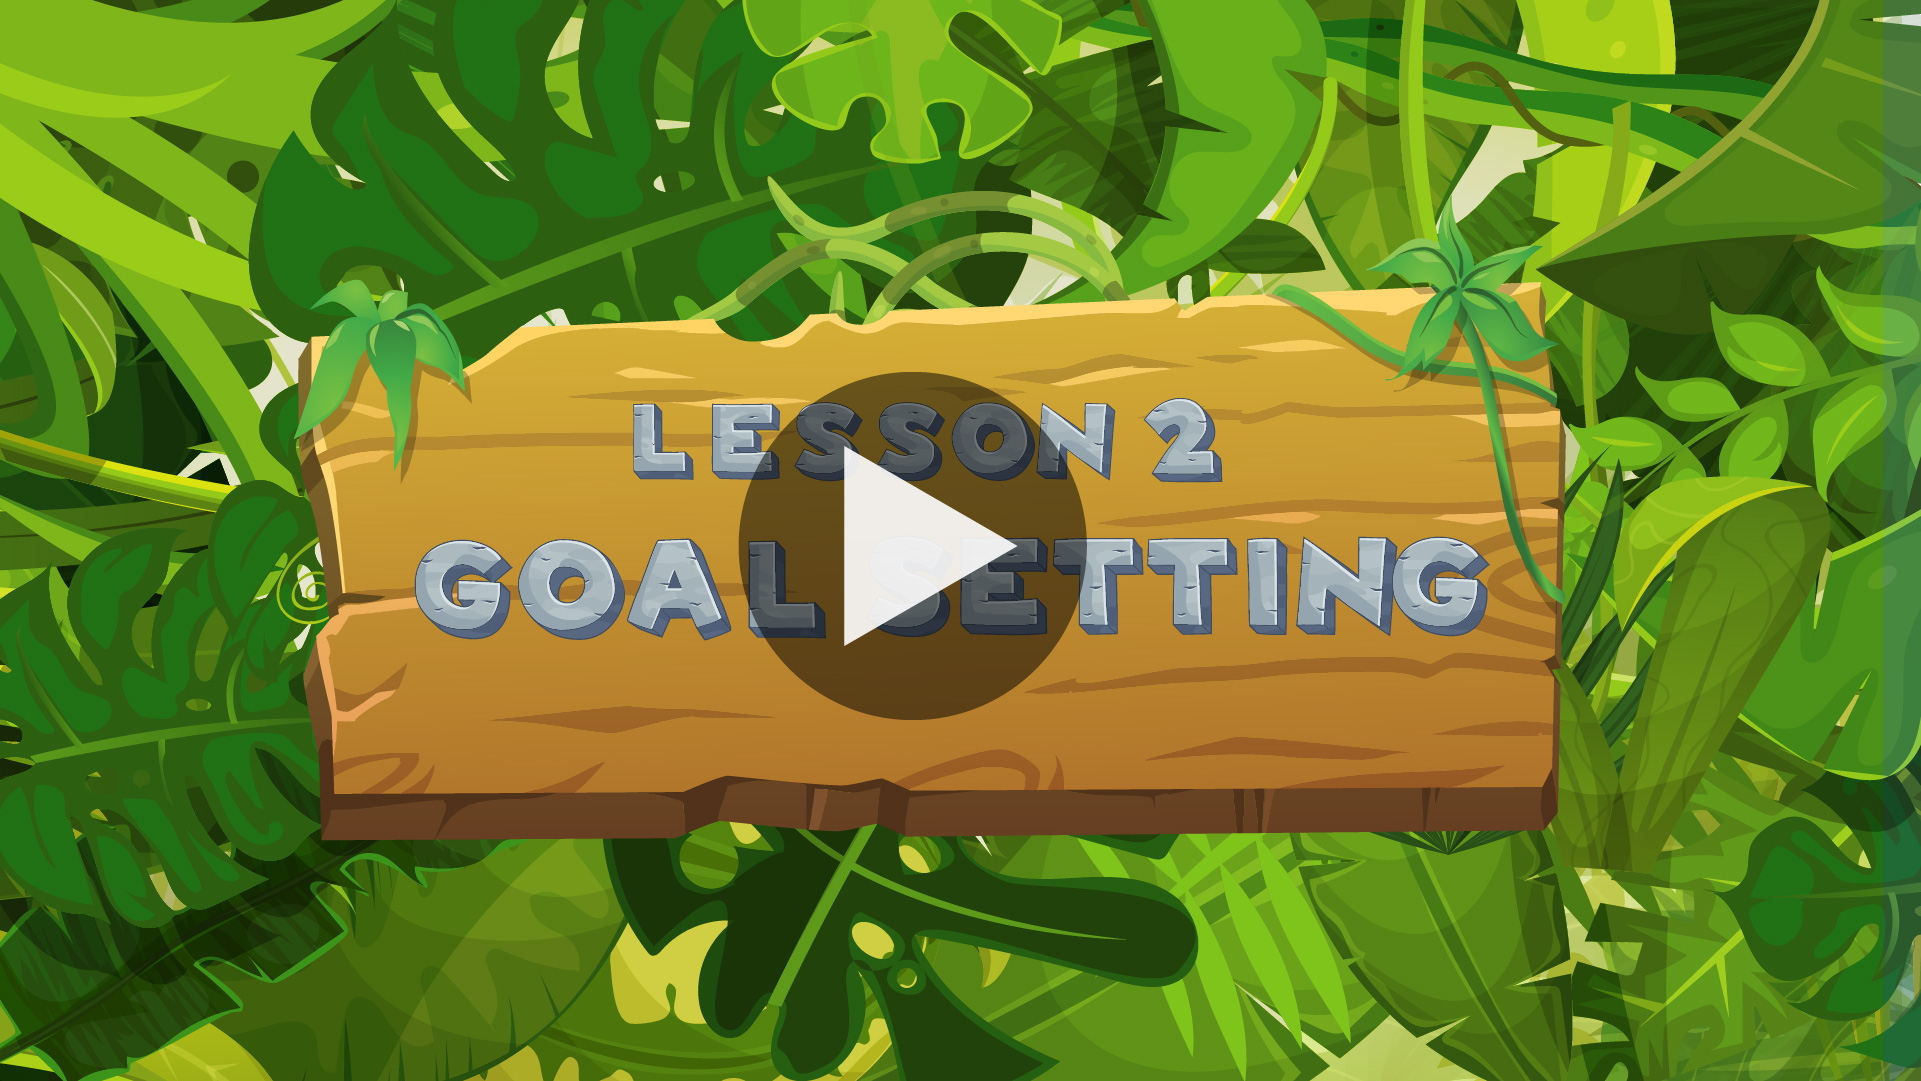 Financial Survival Camp Goal Setting video